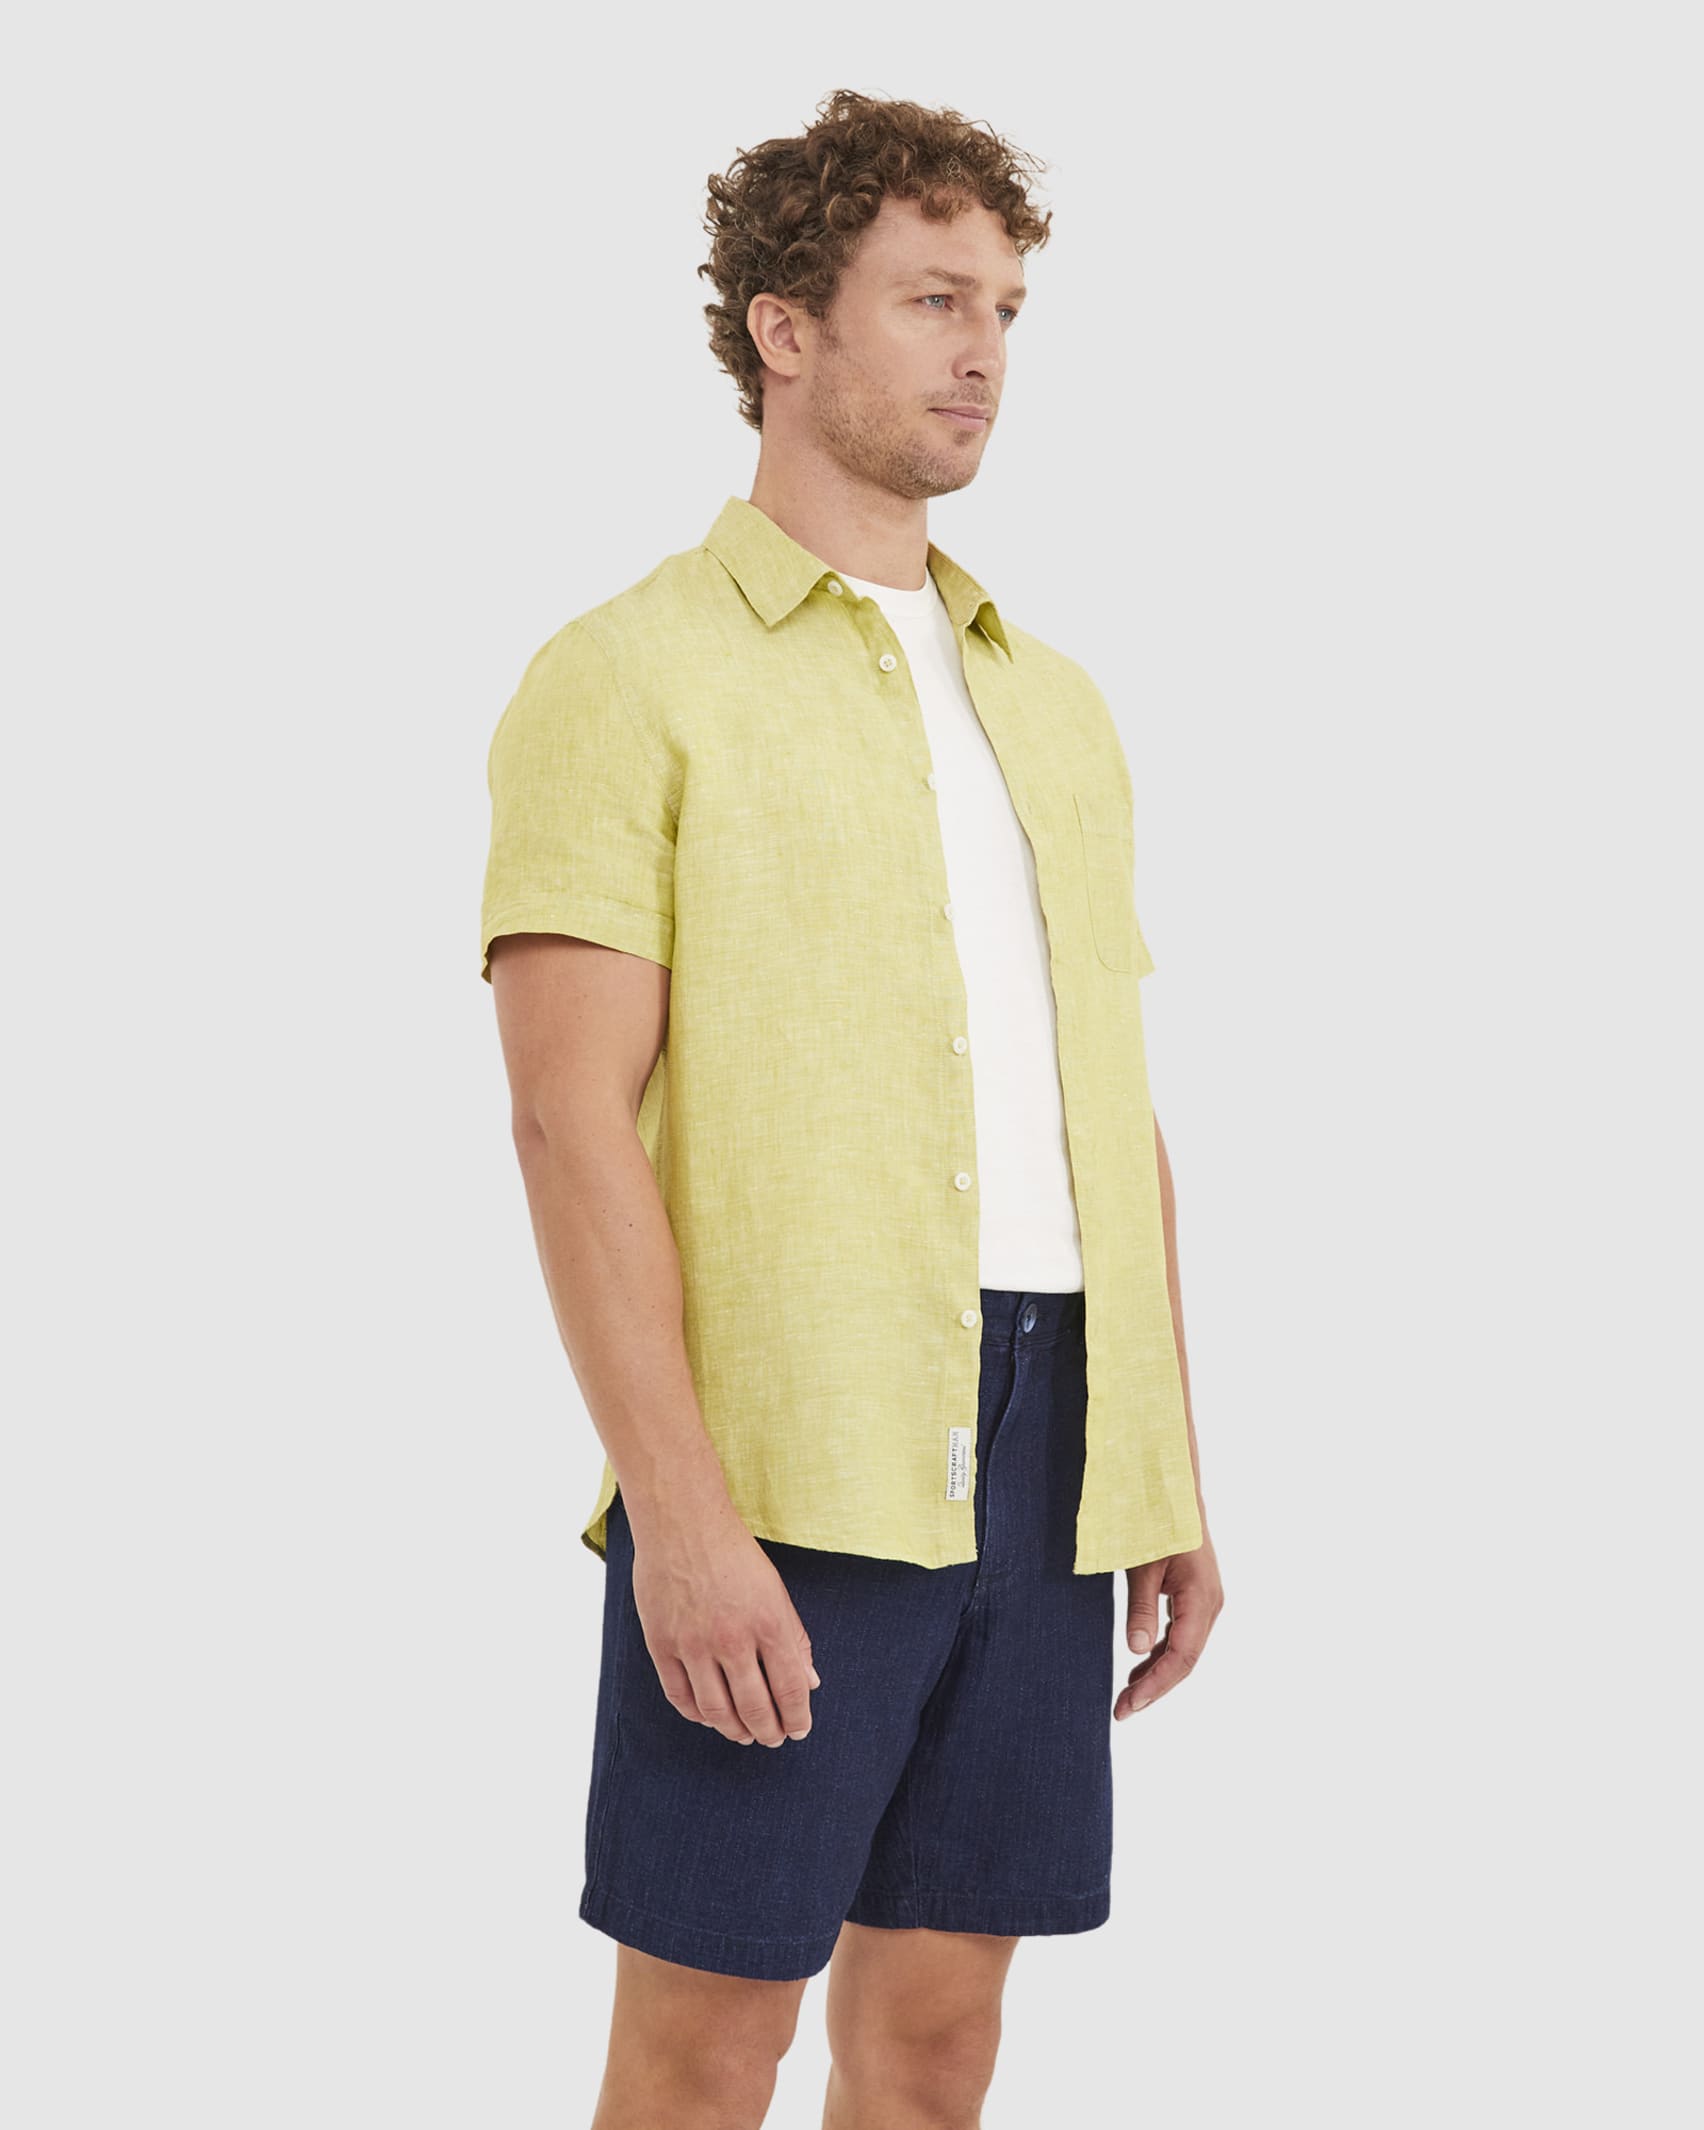 Yarn Dyed Linen Short Sleeve Shirt in CHARTREUSE